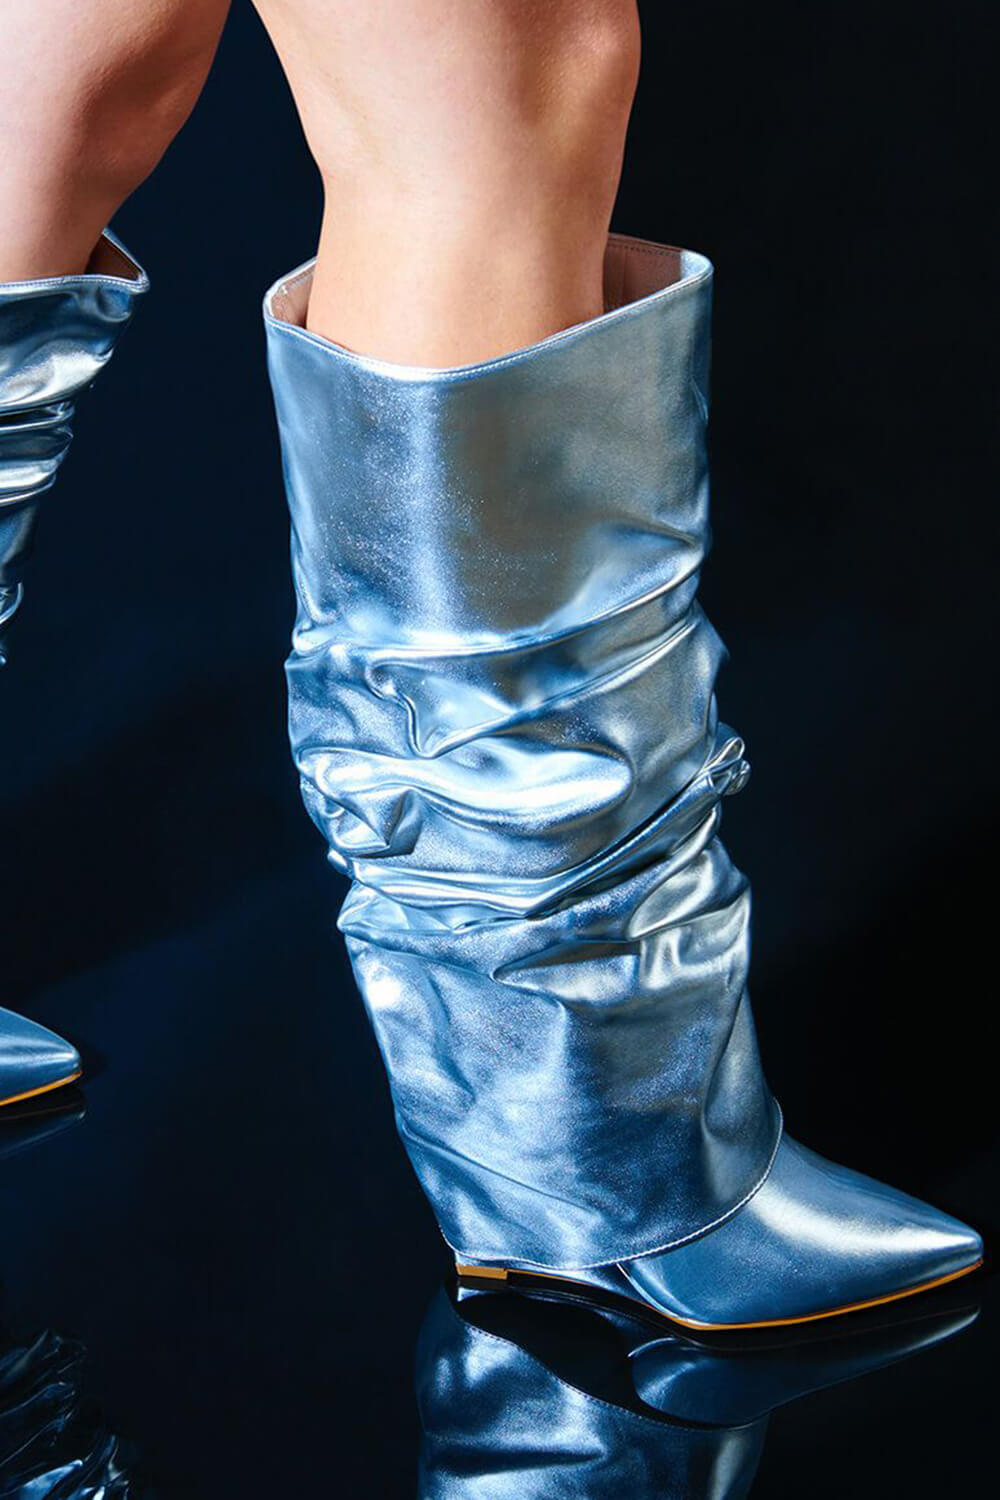 Metallic Scrunched Foldover Wedge Heel Knee High Boots - Silver